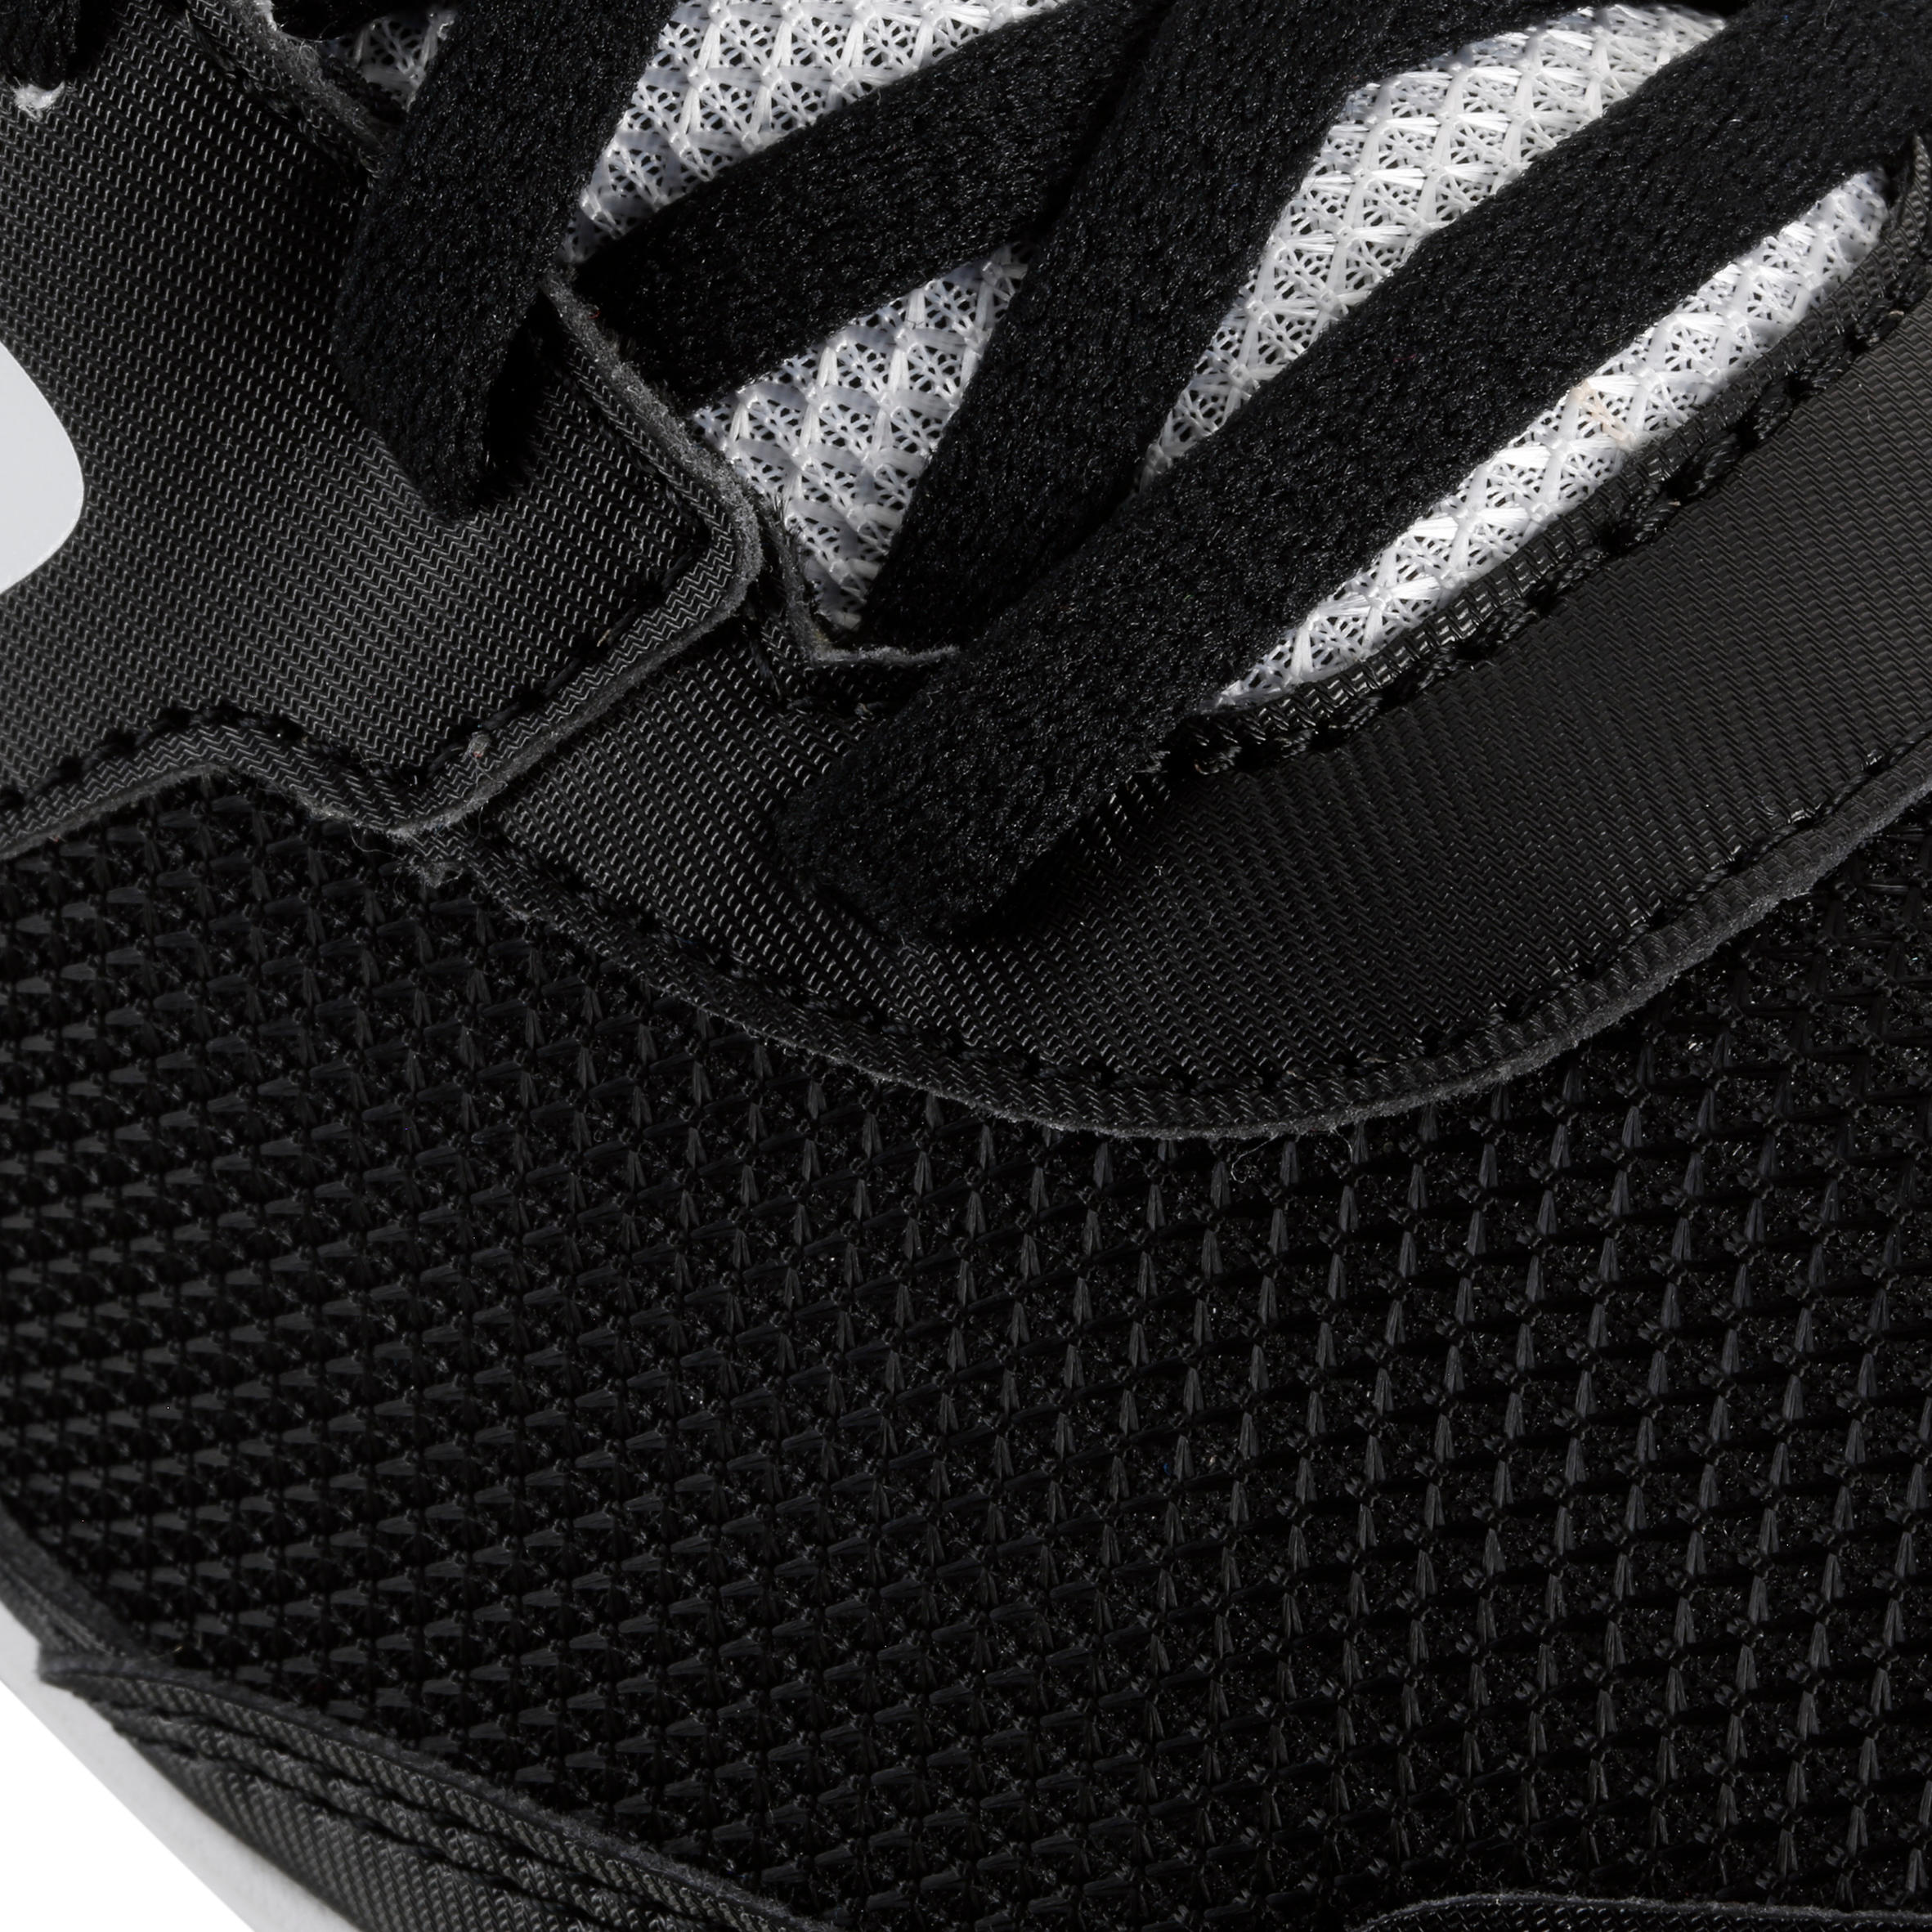 ATHLETICS TRAINERS WITH SPIKES BLACK WHITE 8/18